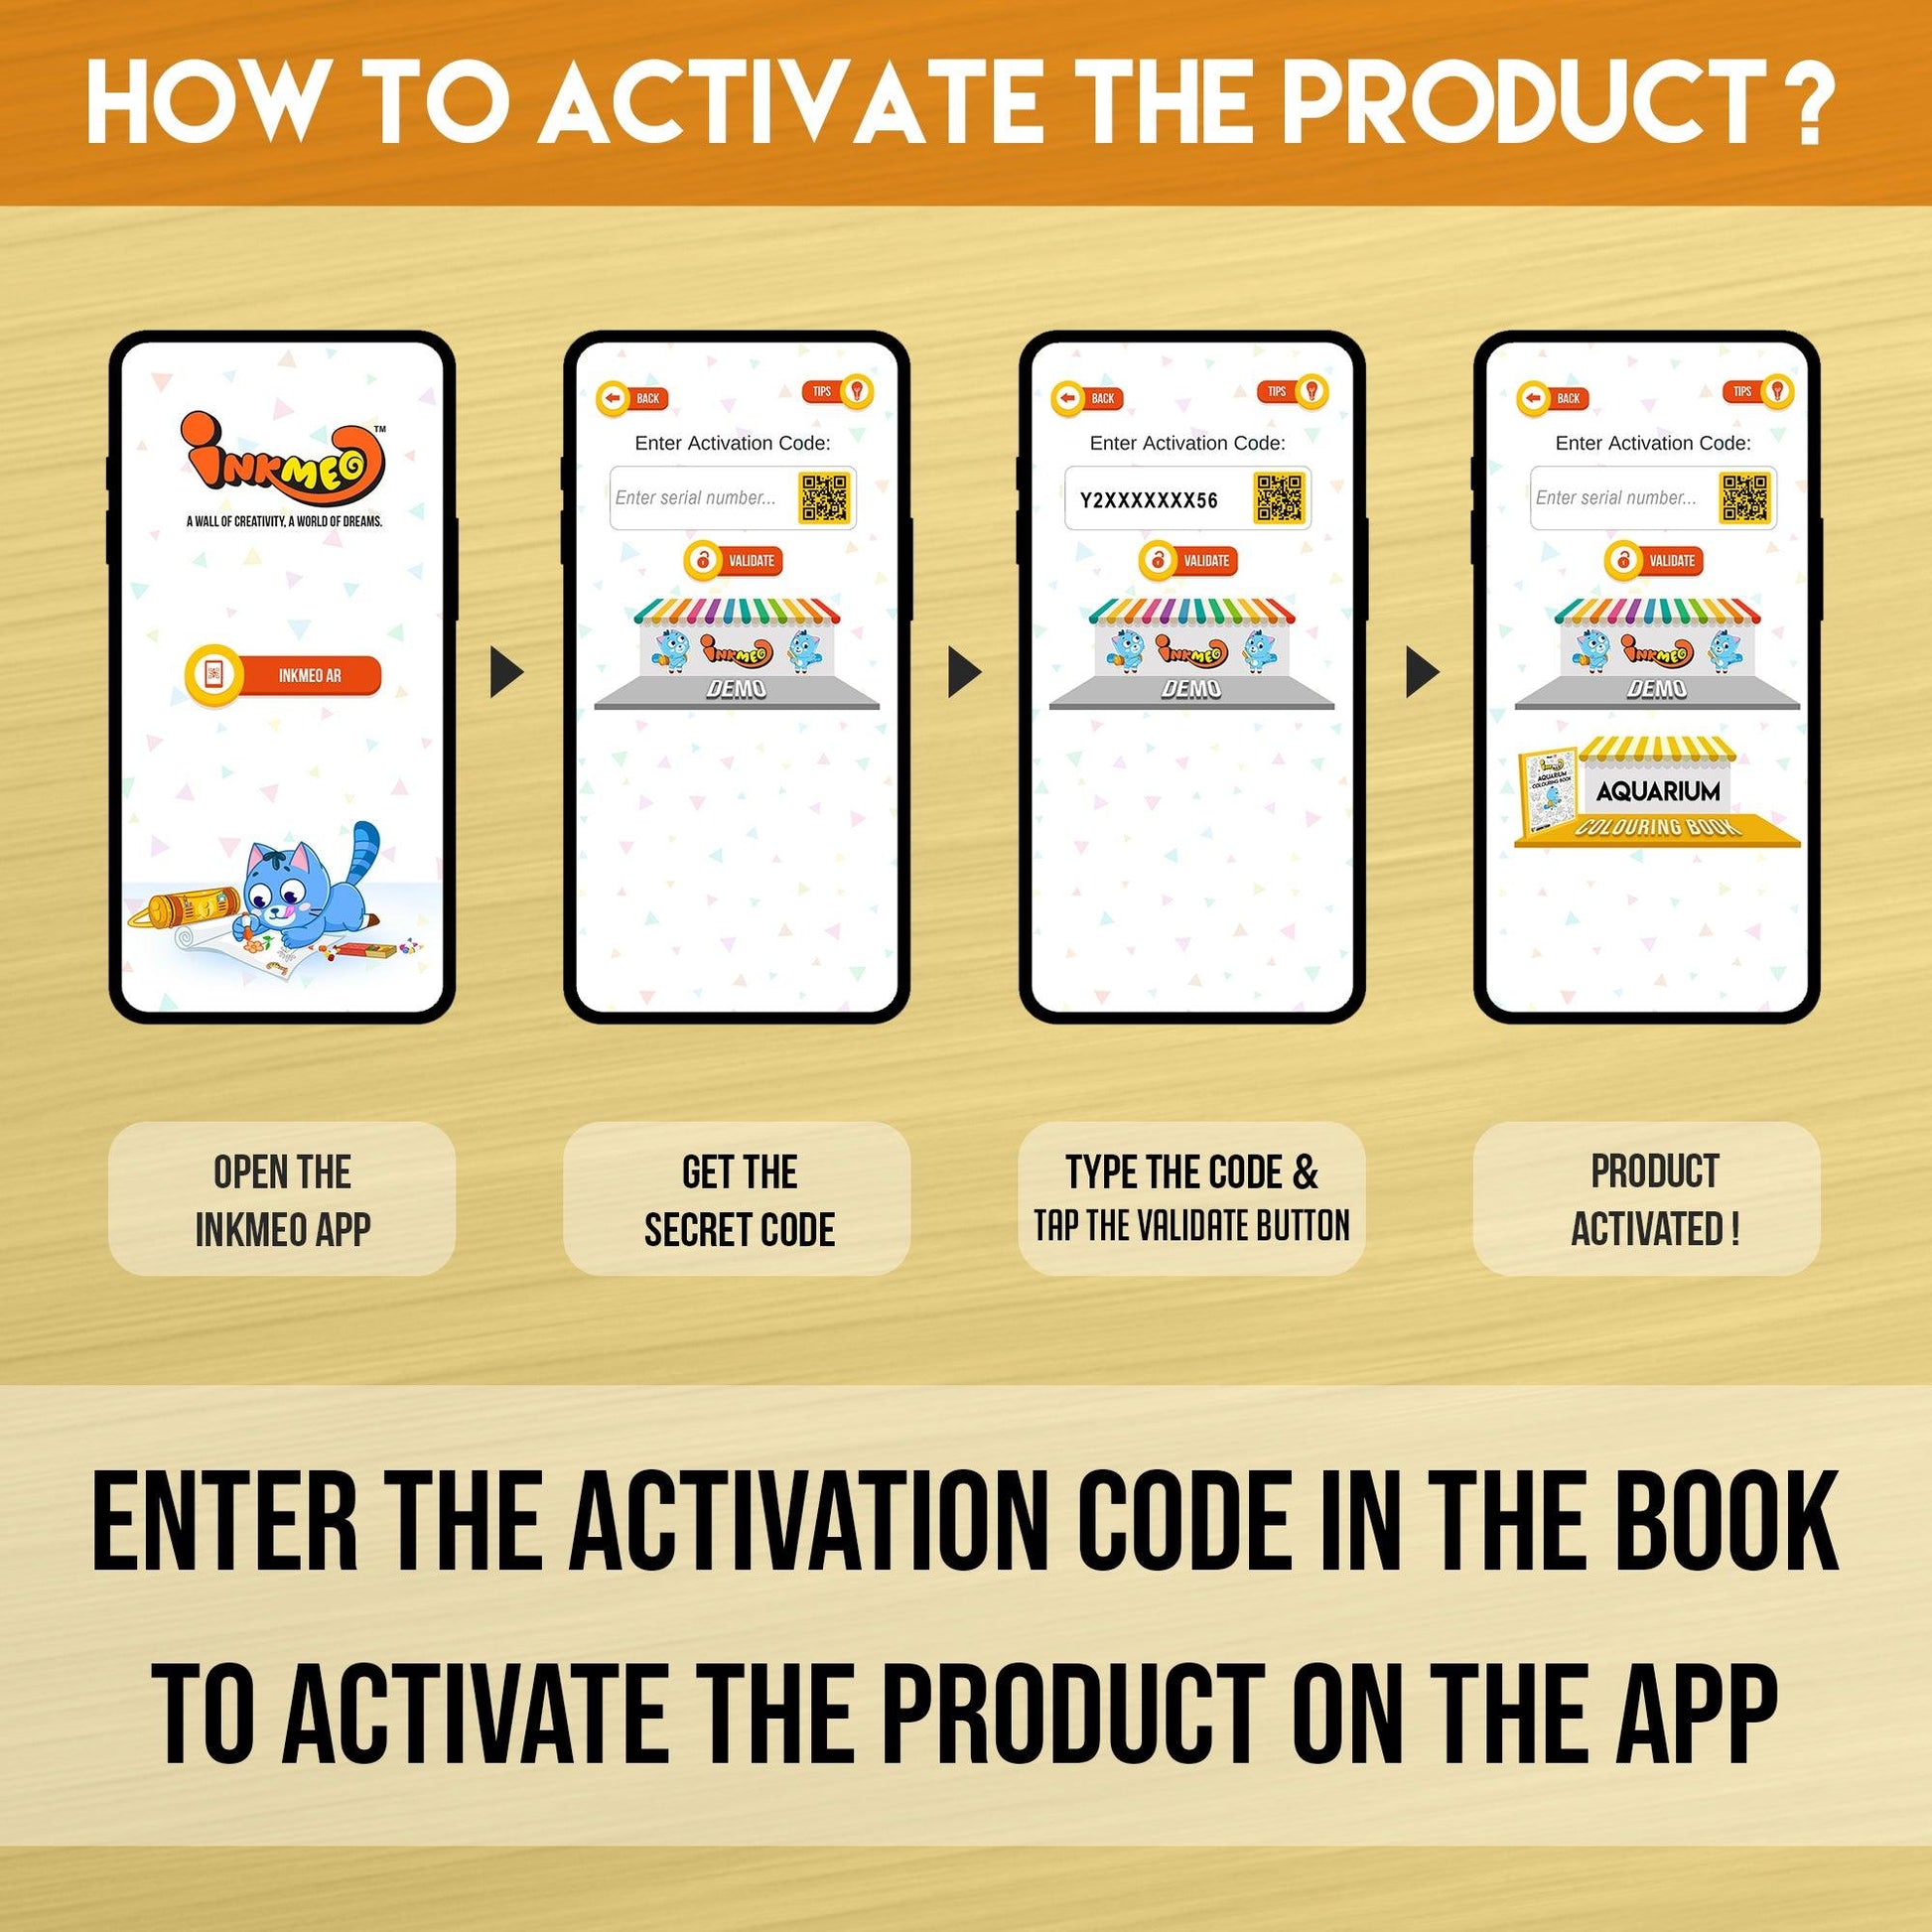 The image displays a yellow background with four phones showcasing the message "To access the Inkmeo app, acquire the secret code, input the code, and tap for validation to activate the product.